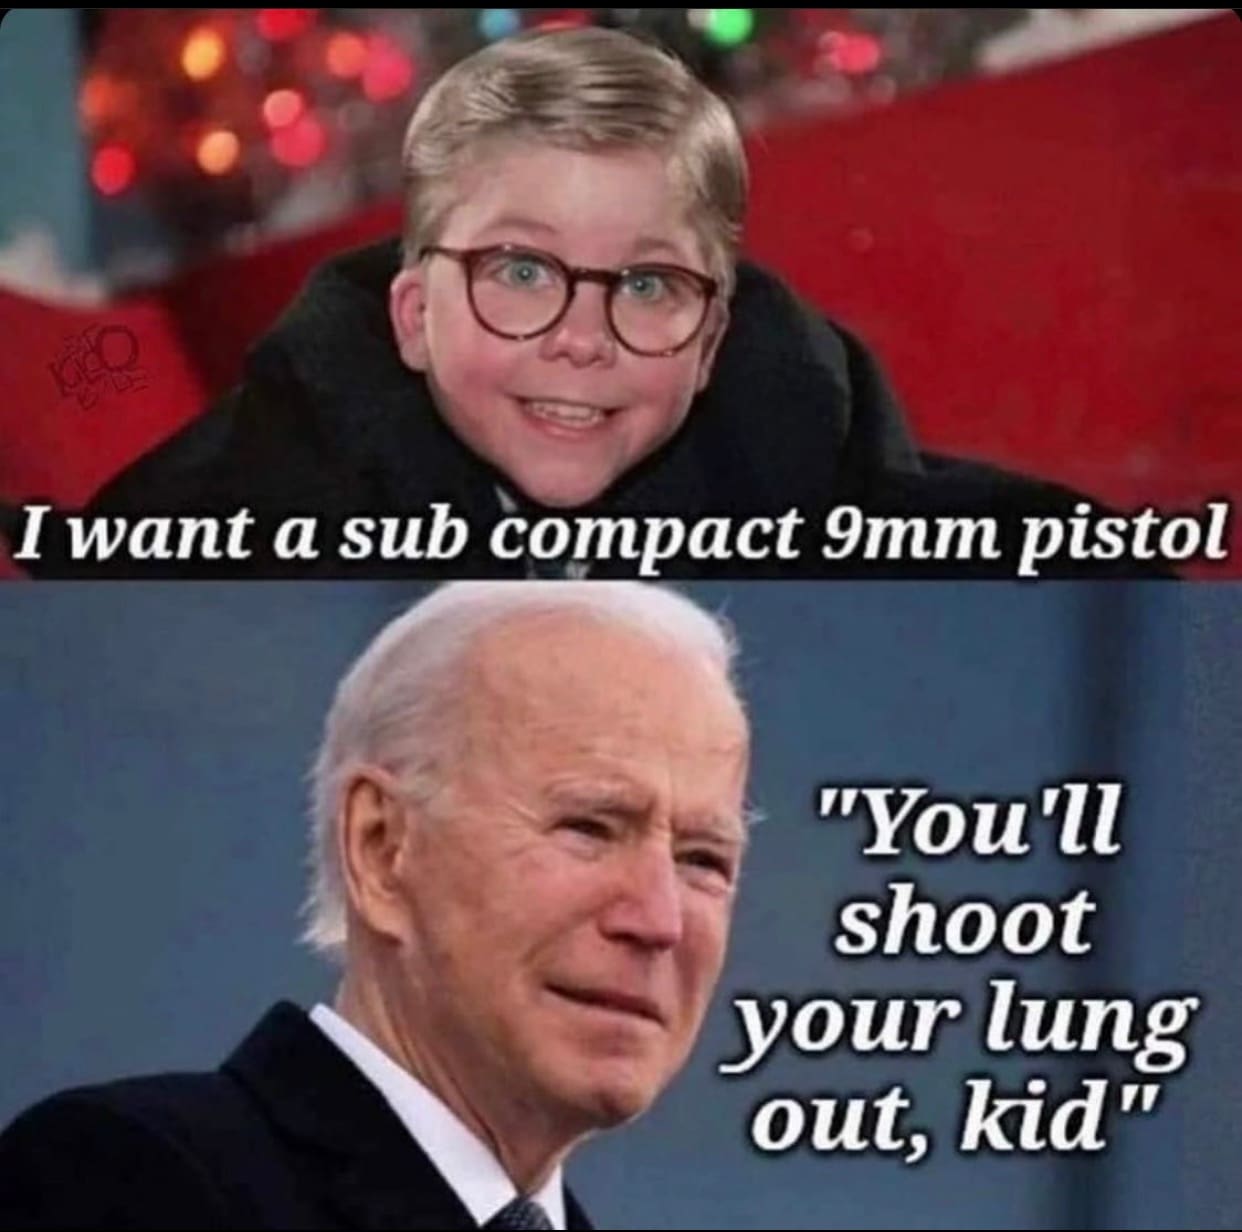 Gun Meme of the Day: Poor Ralphie Edition - The Truth About Guns